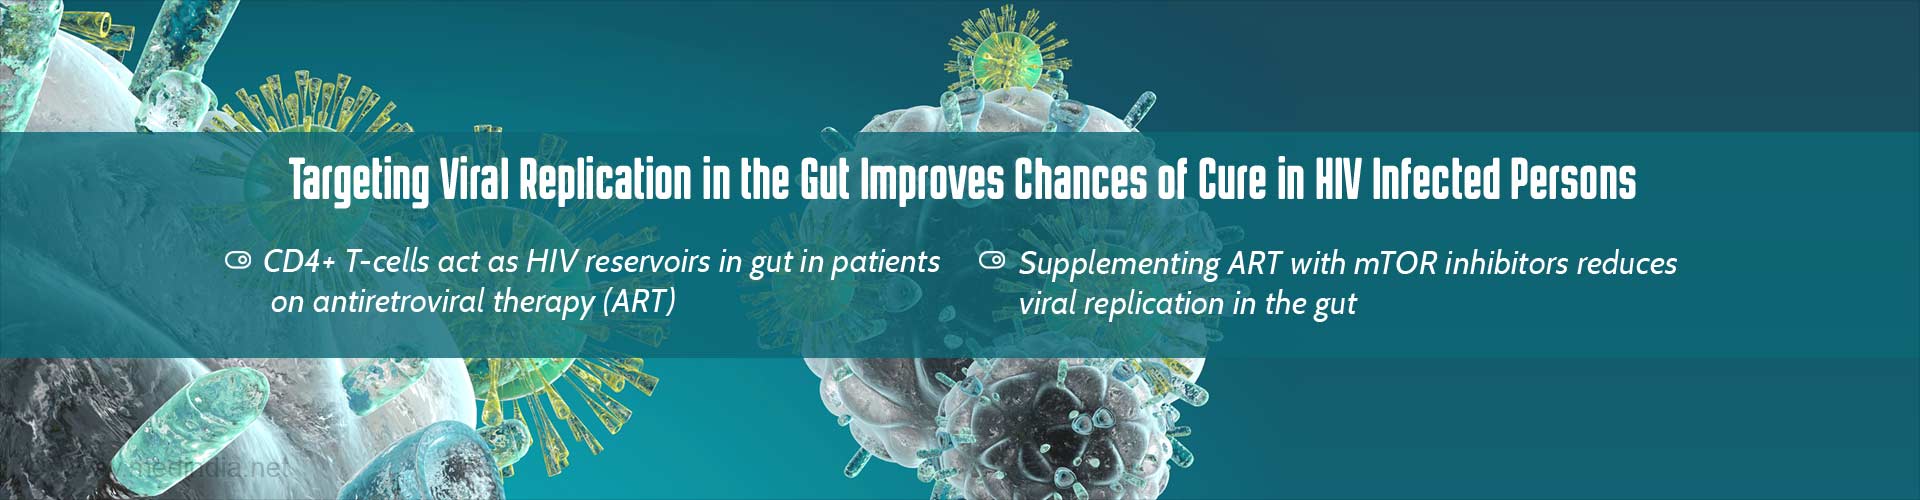 Targeting viral replication in the gut improves chances of cure in HIV infected persons
- CD4+ T-cells act as HIV reservoirs in gut in patients on antiretoviral therapy (ART)
- Supplementing ART with mTOR inhibitors reduces viral replcation in the gut